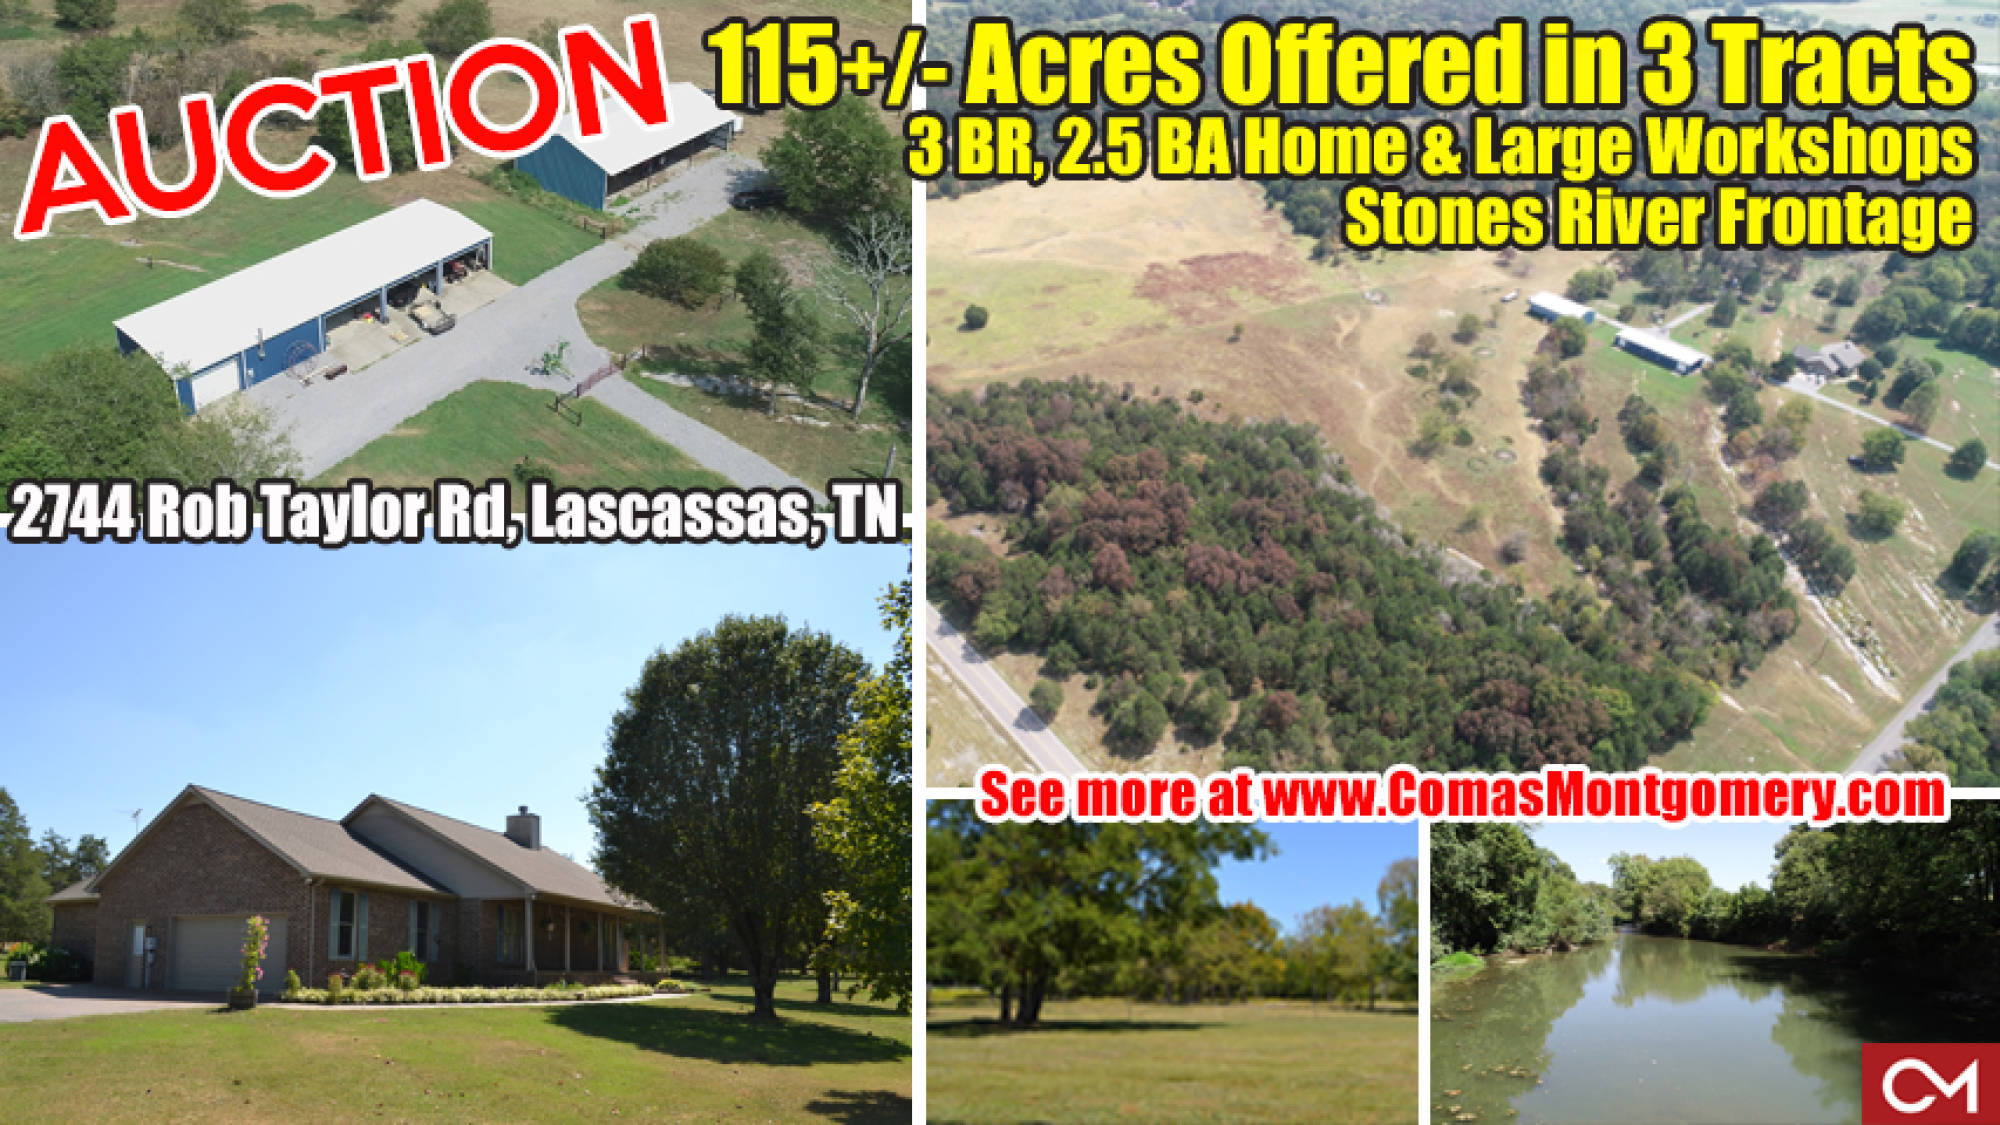 Land, Acres, Tracts, For Sale, Stones River, Frontage, Comas, Montgomery, Rob Taylor, Murfreesboro, Lascassas, Workshop, House, Home